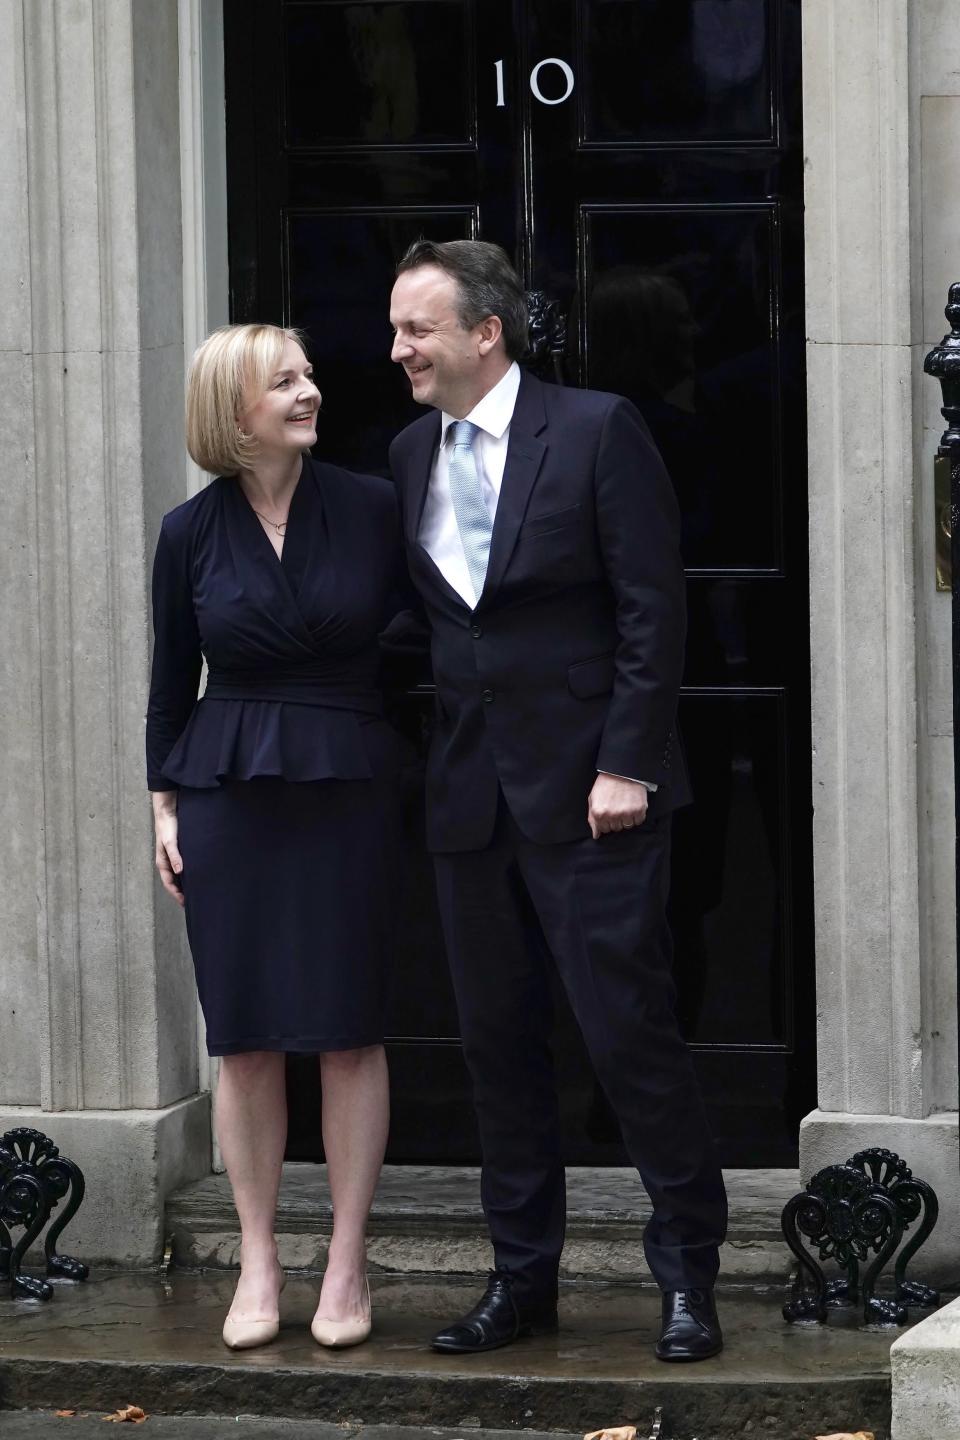 New Prime Minister Liz Truss and her husband Hugh O'Leary pose outside 10 Downing Street (PA)